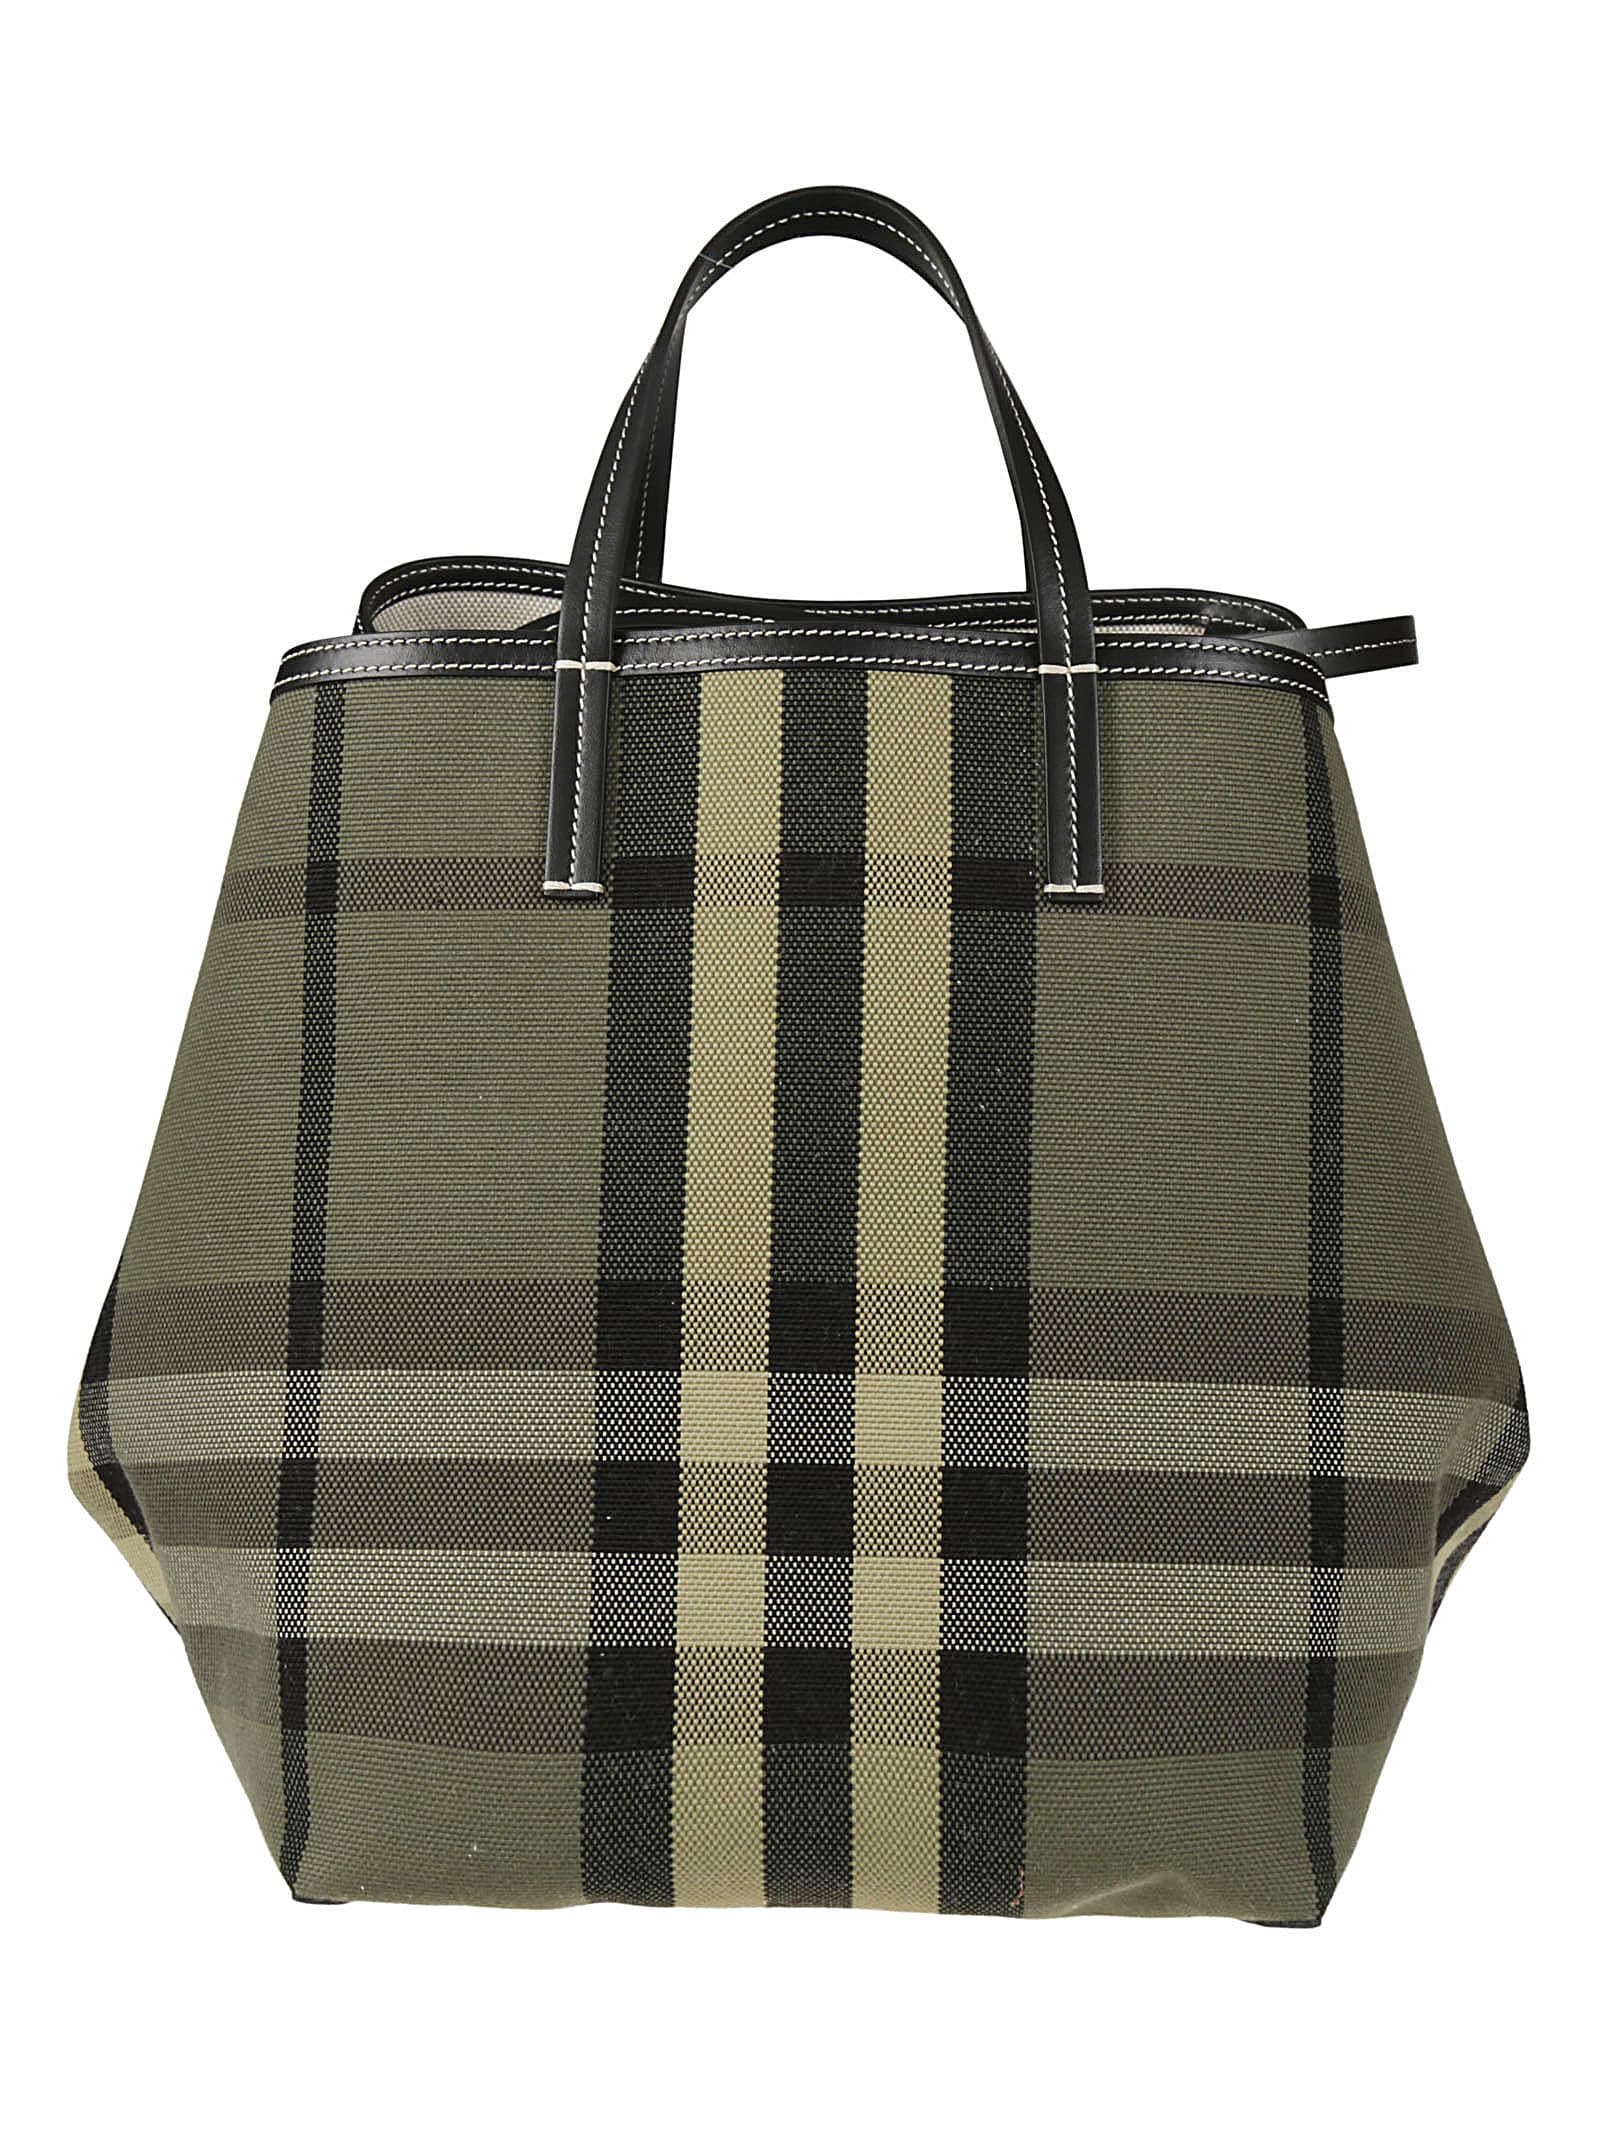 Burberry Check Patterned Tote